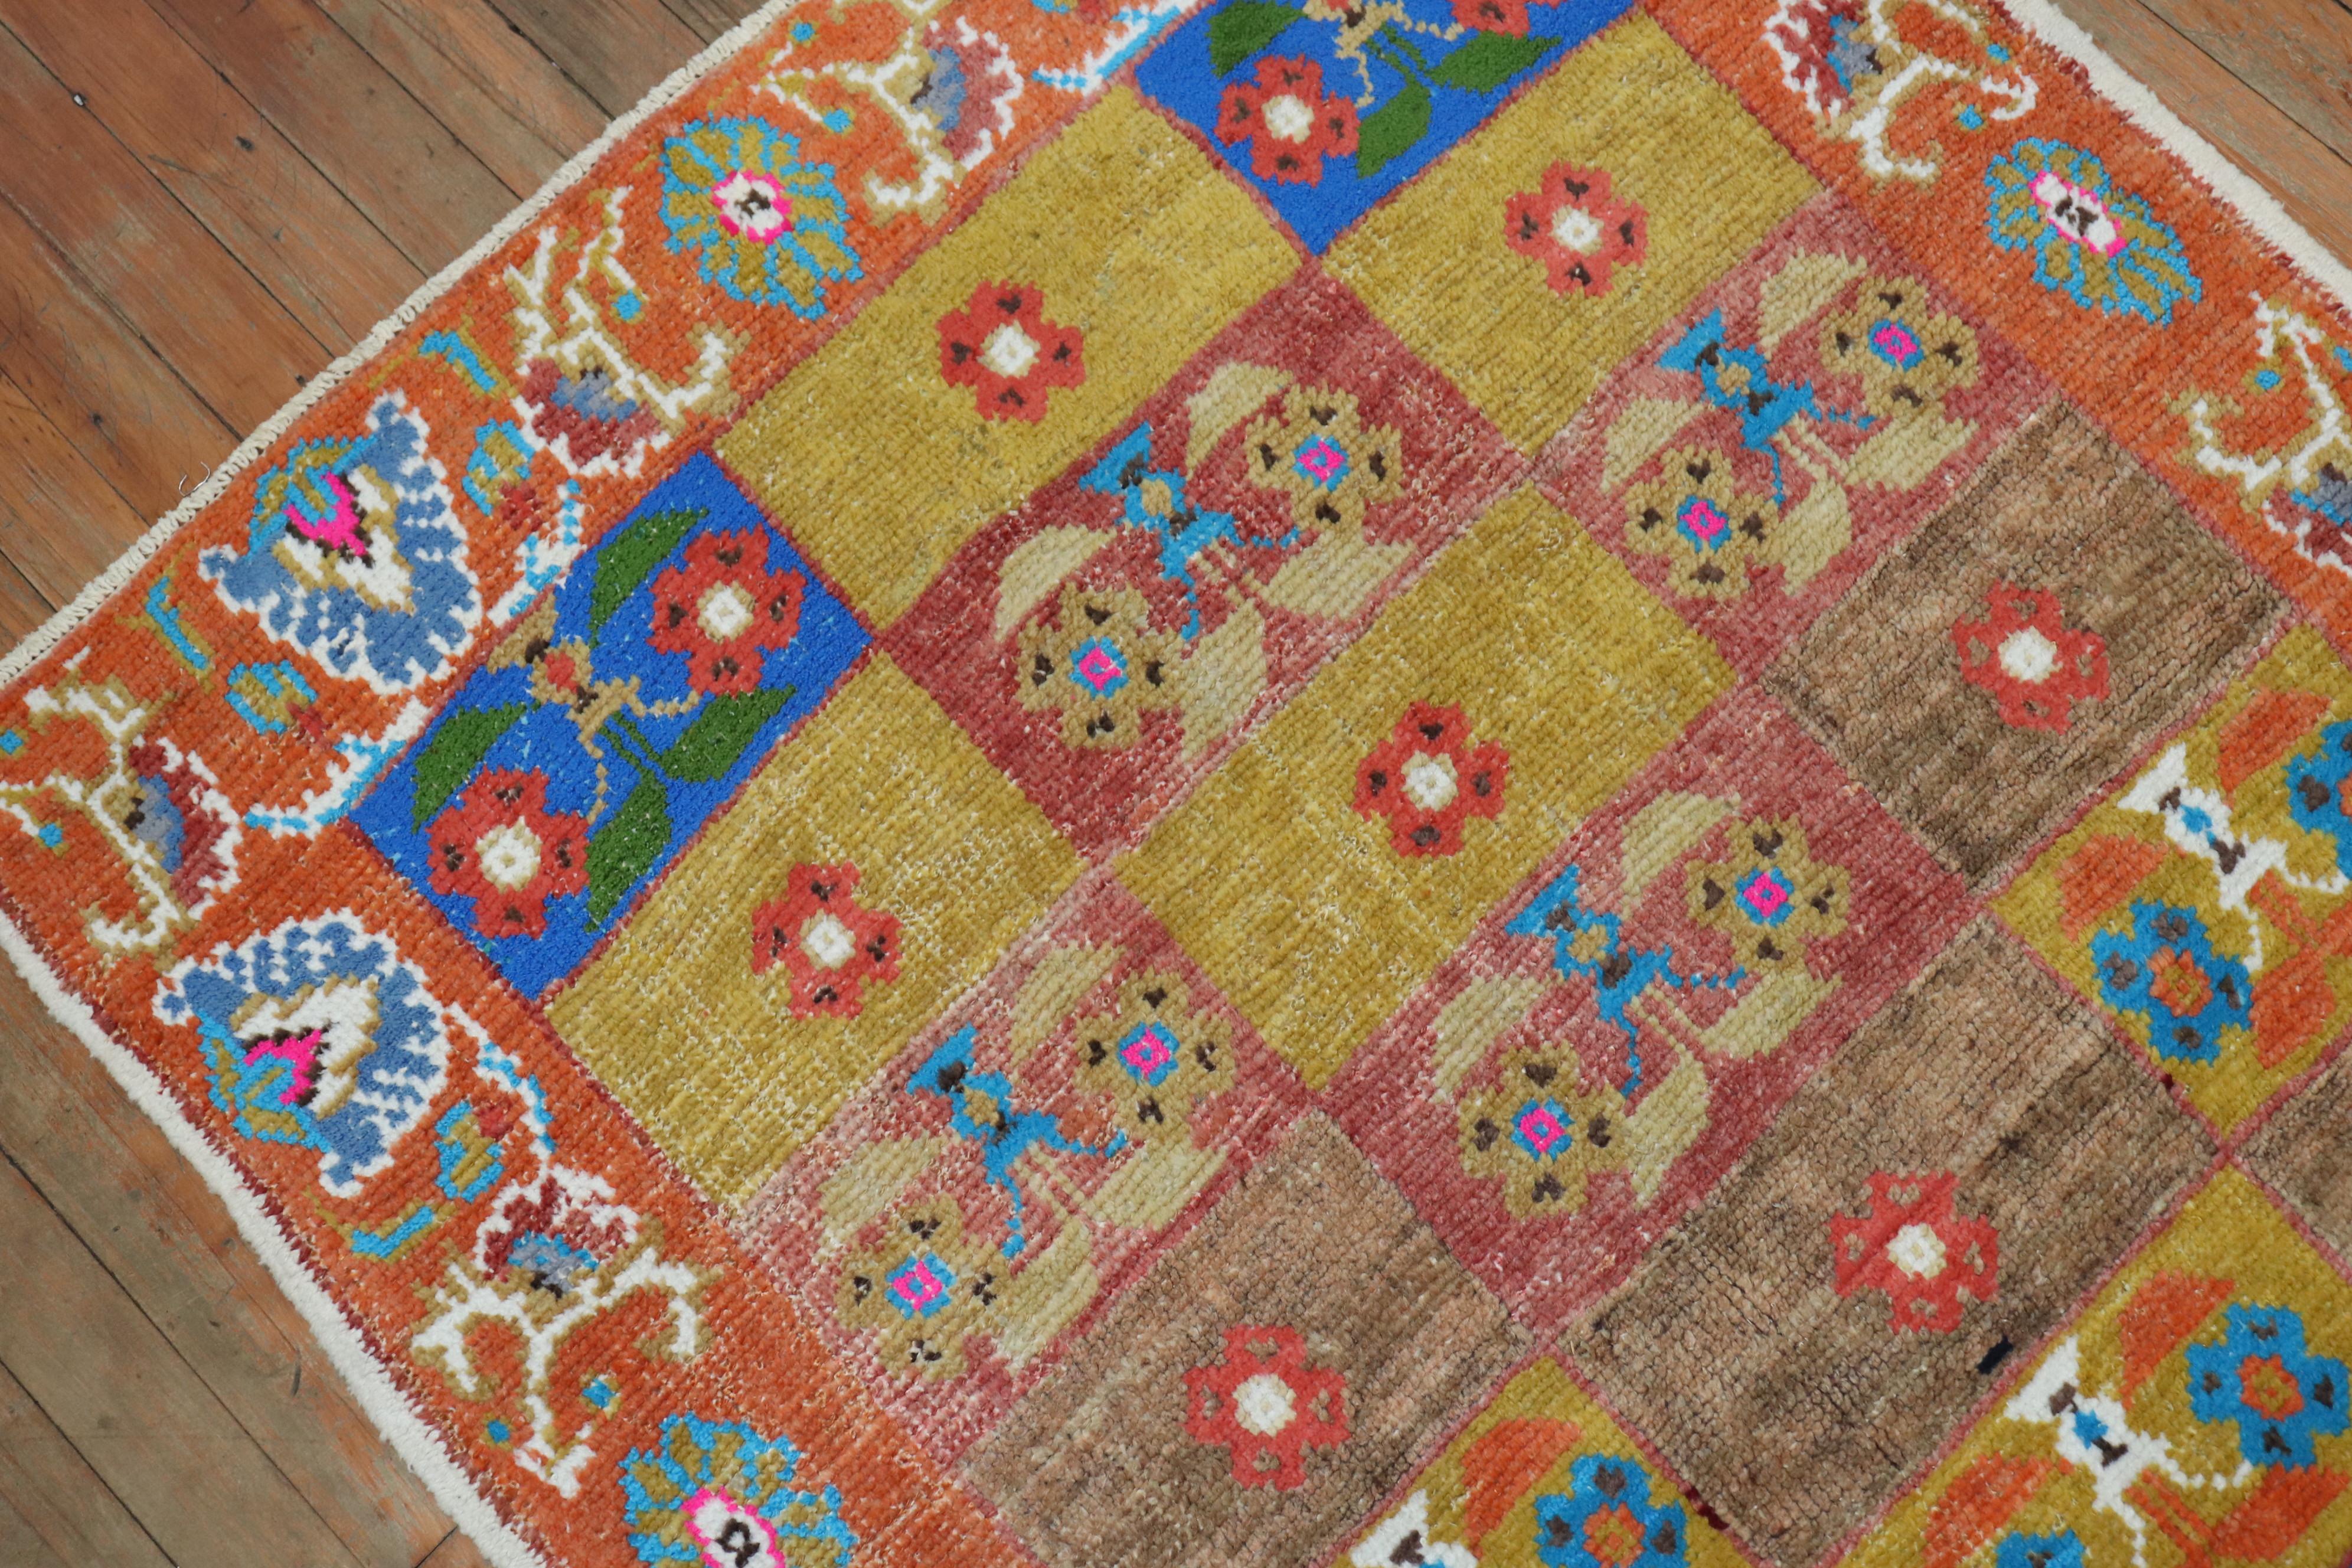 A pair of mid-20th century Turkish Anatolian rugs in bright intense colors. A multi-color repetitive box design surrounded by an orange peel border

Measuring: 3'2